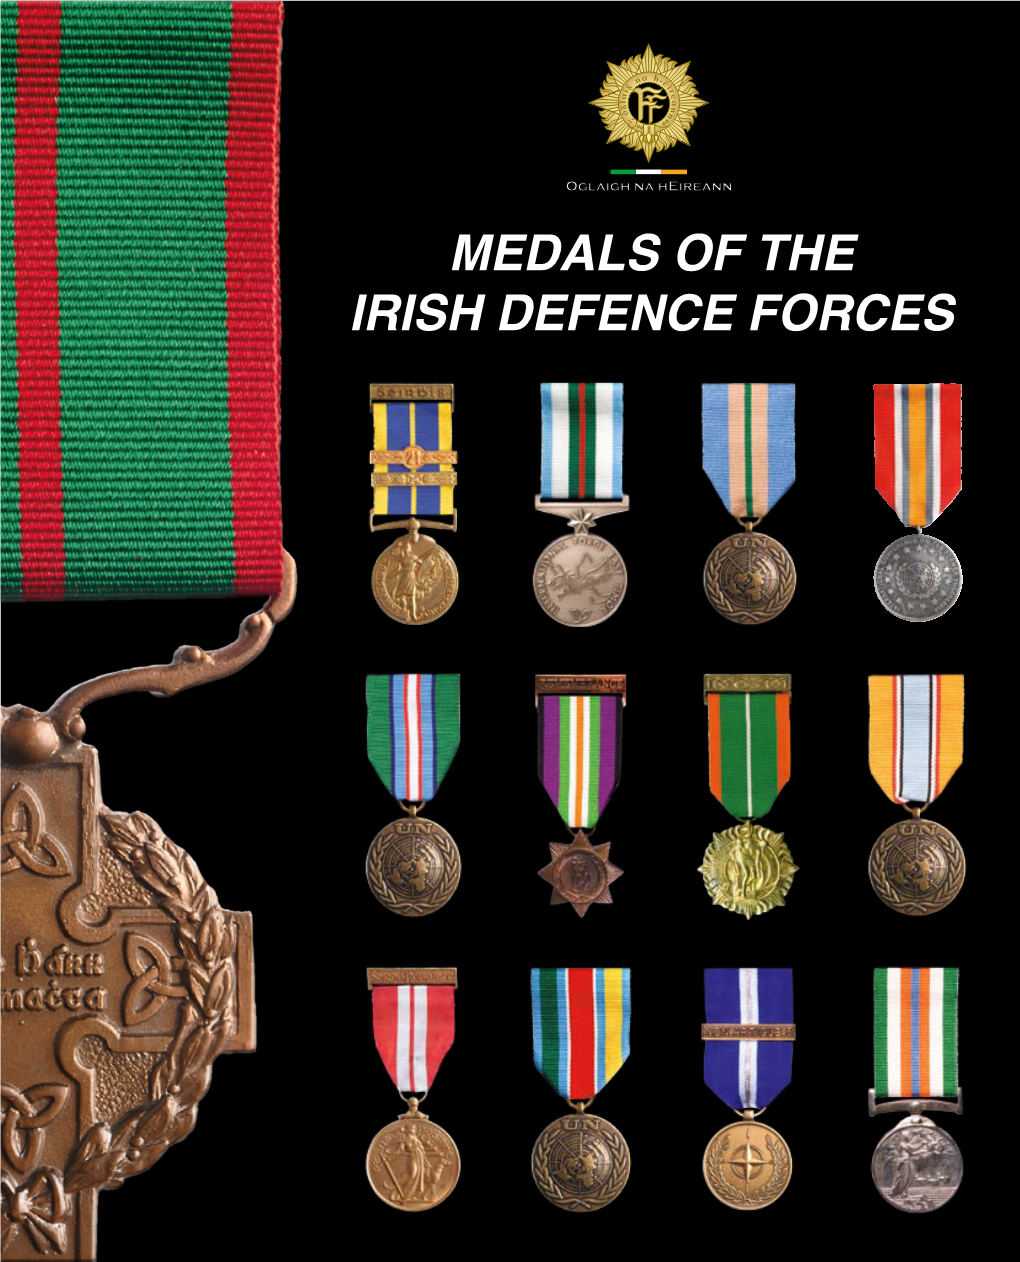 MEDALS of the IRISH DEFENCE FORCES MEDALS of the IRISH DEFENCE FORCES